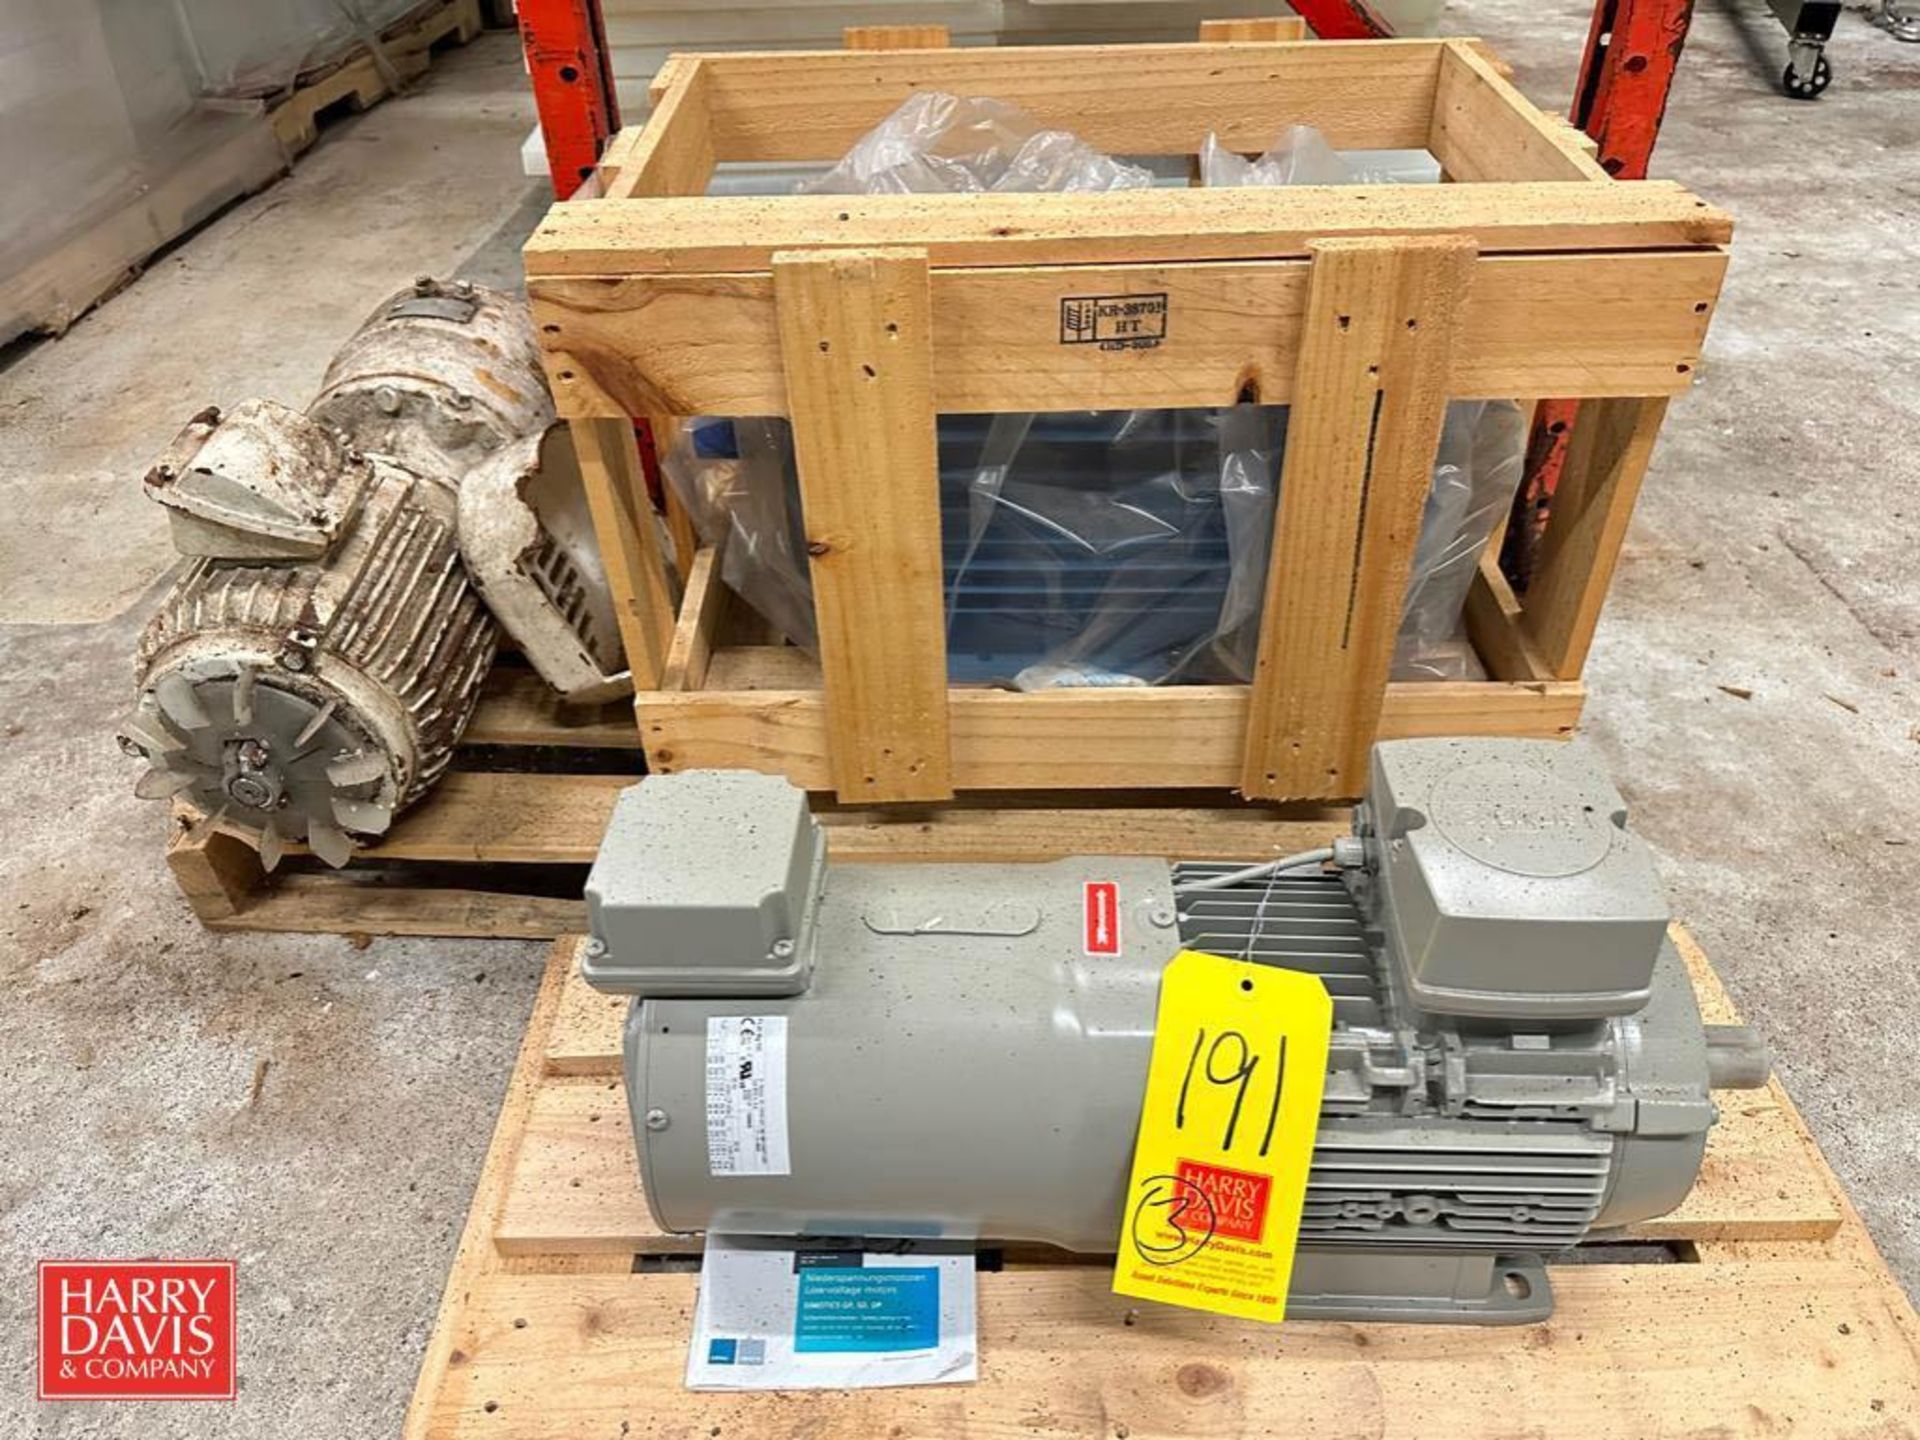 Motors, Including: NEW Siemens 3-Motor, Crown Triton 5 HP 1,170 RPM Motor and Sterling Electric 2 HP